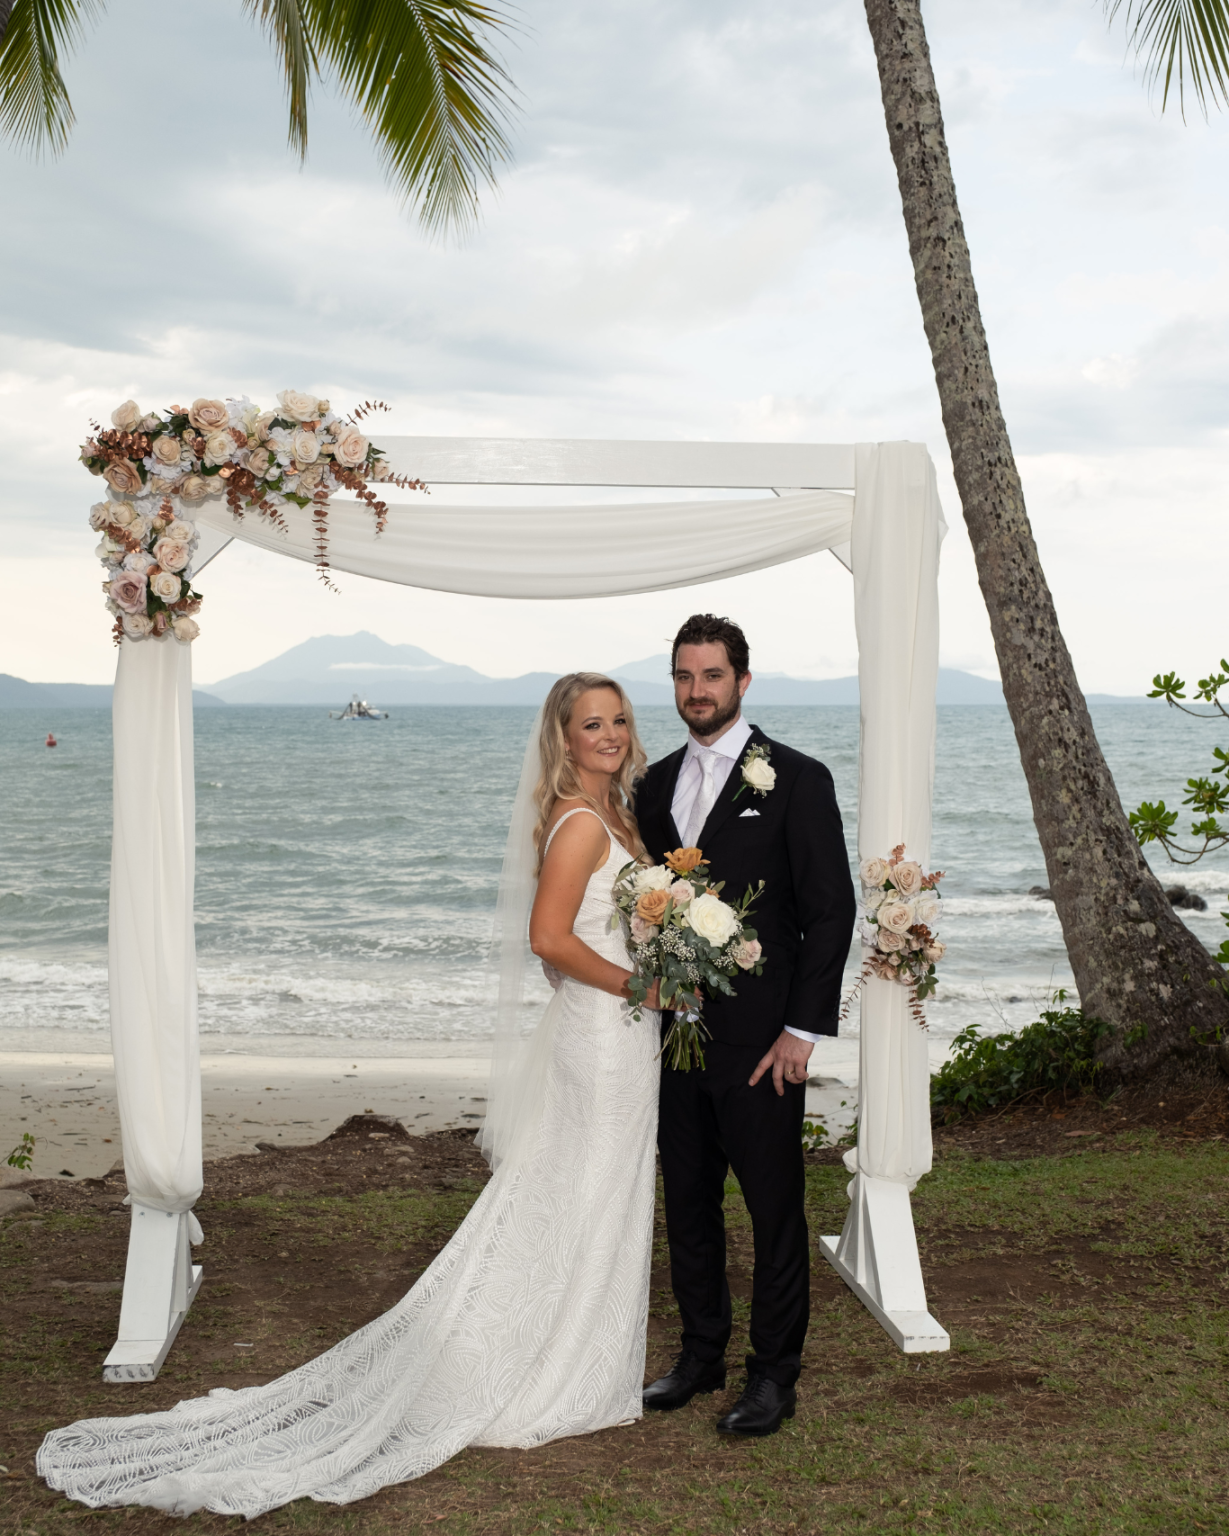 Melaleuca Resort - Palm cove weddings - bride and groom right in front of beach